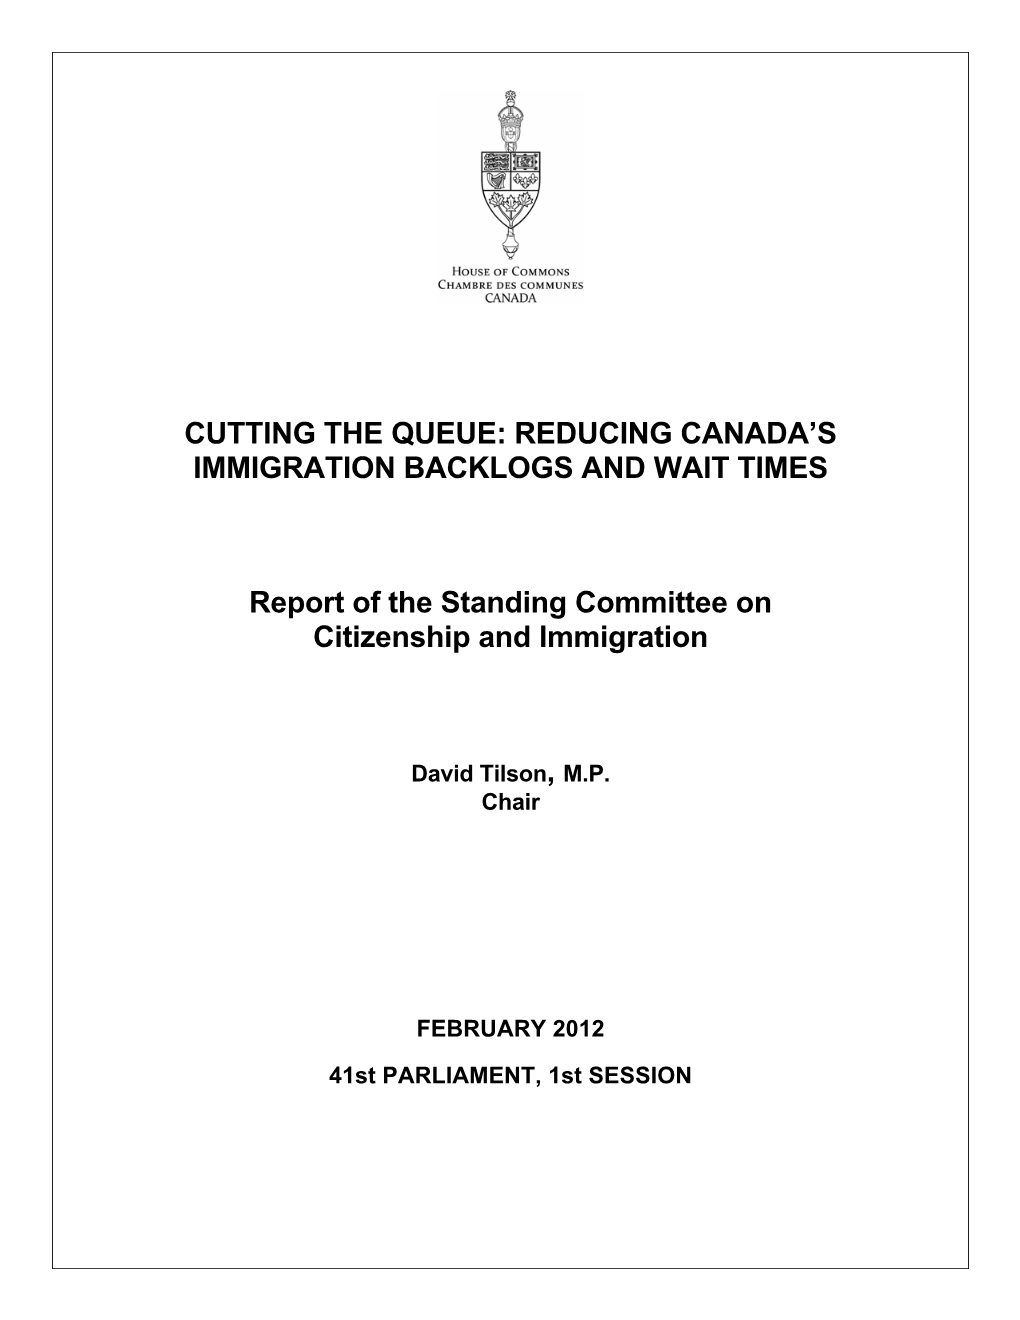 Reducing Canada's Immigration Backlogs and Wait Times